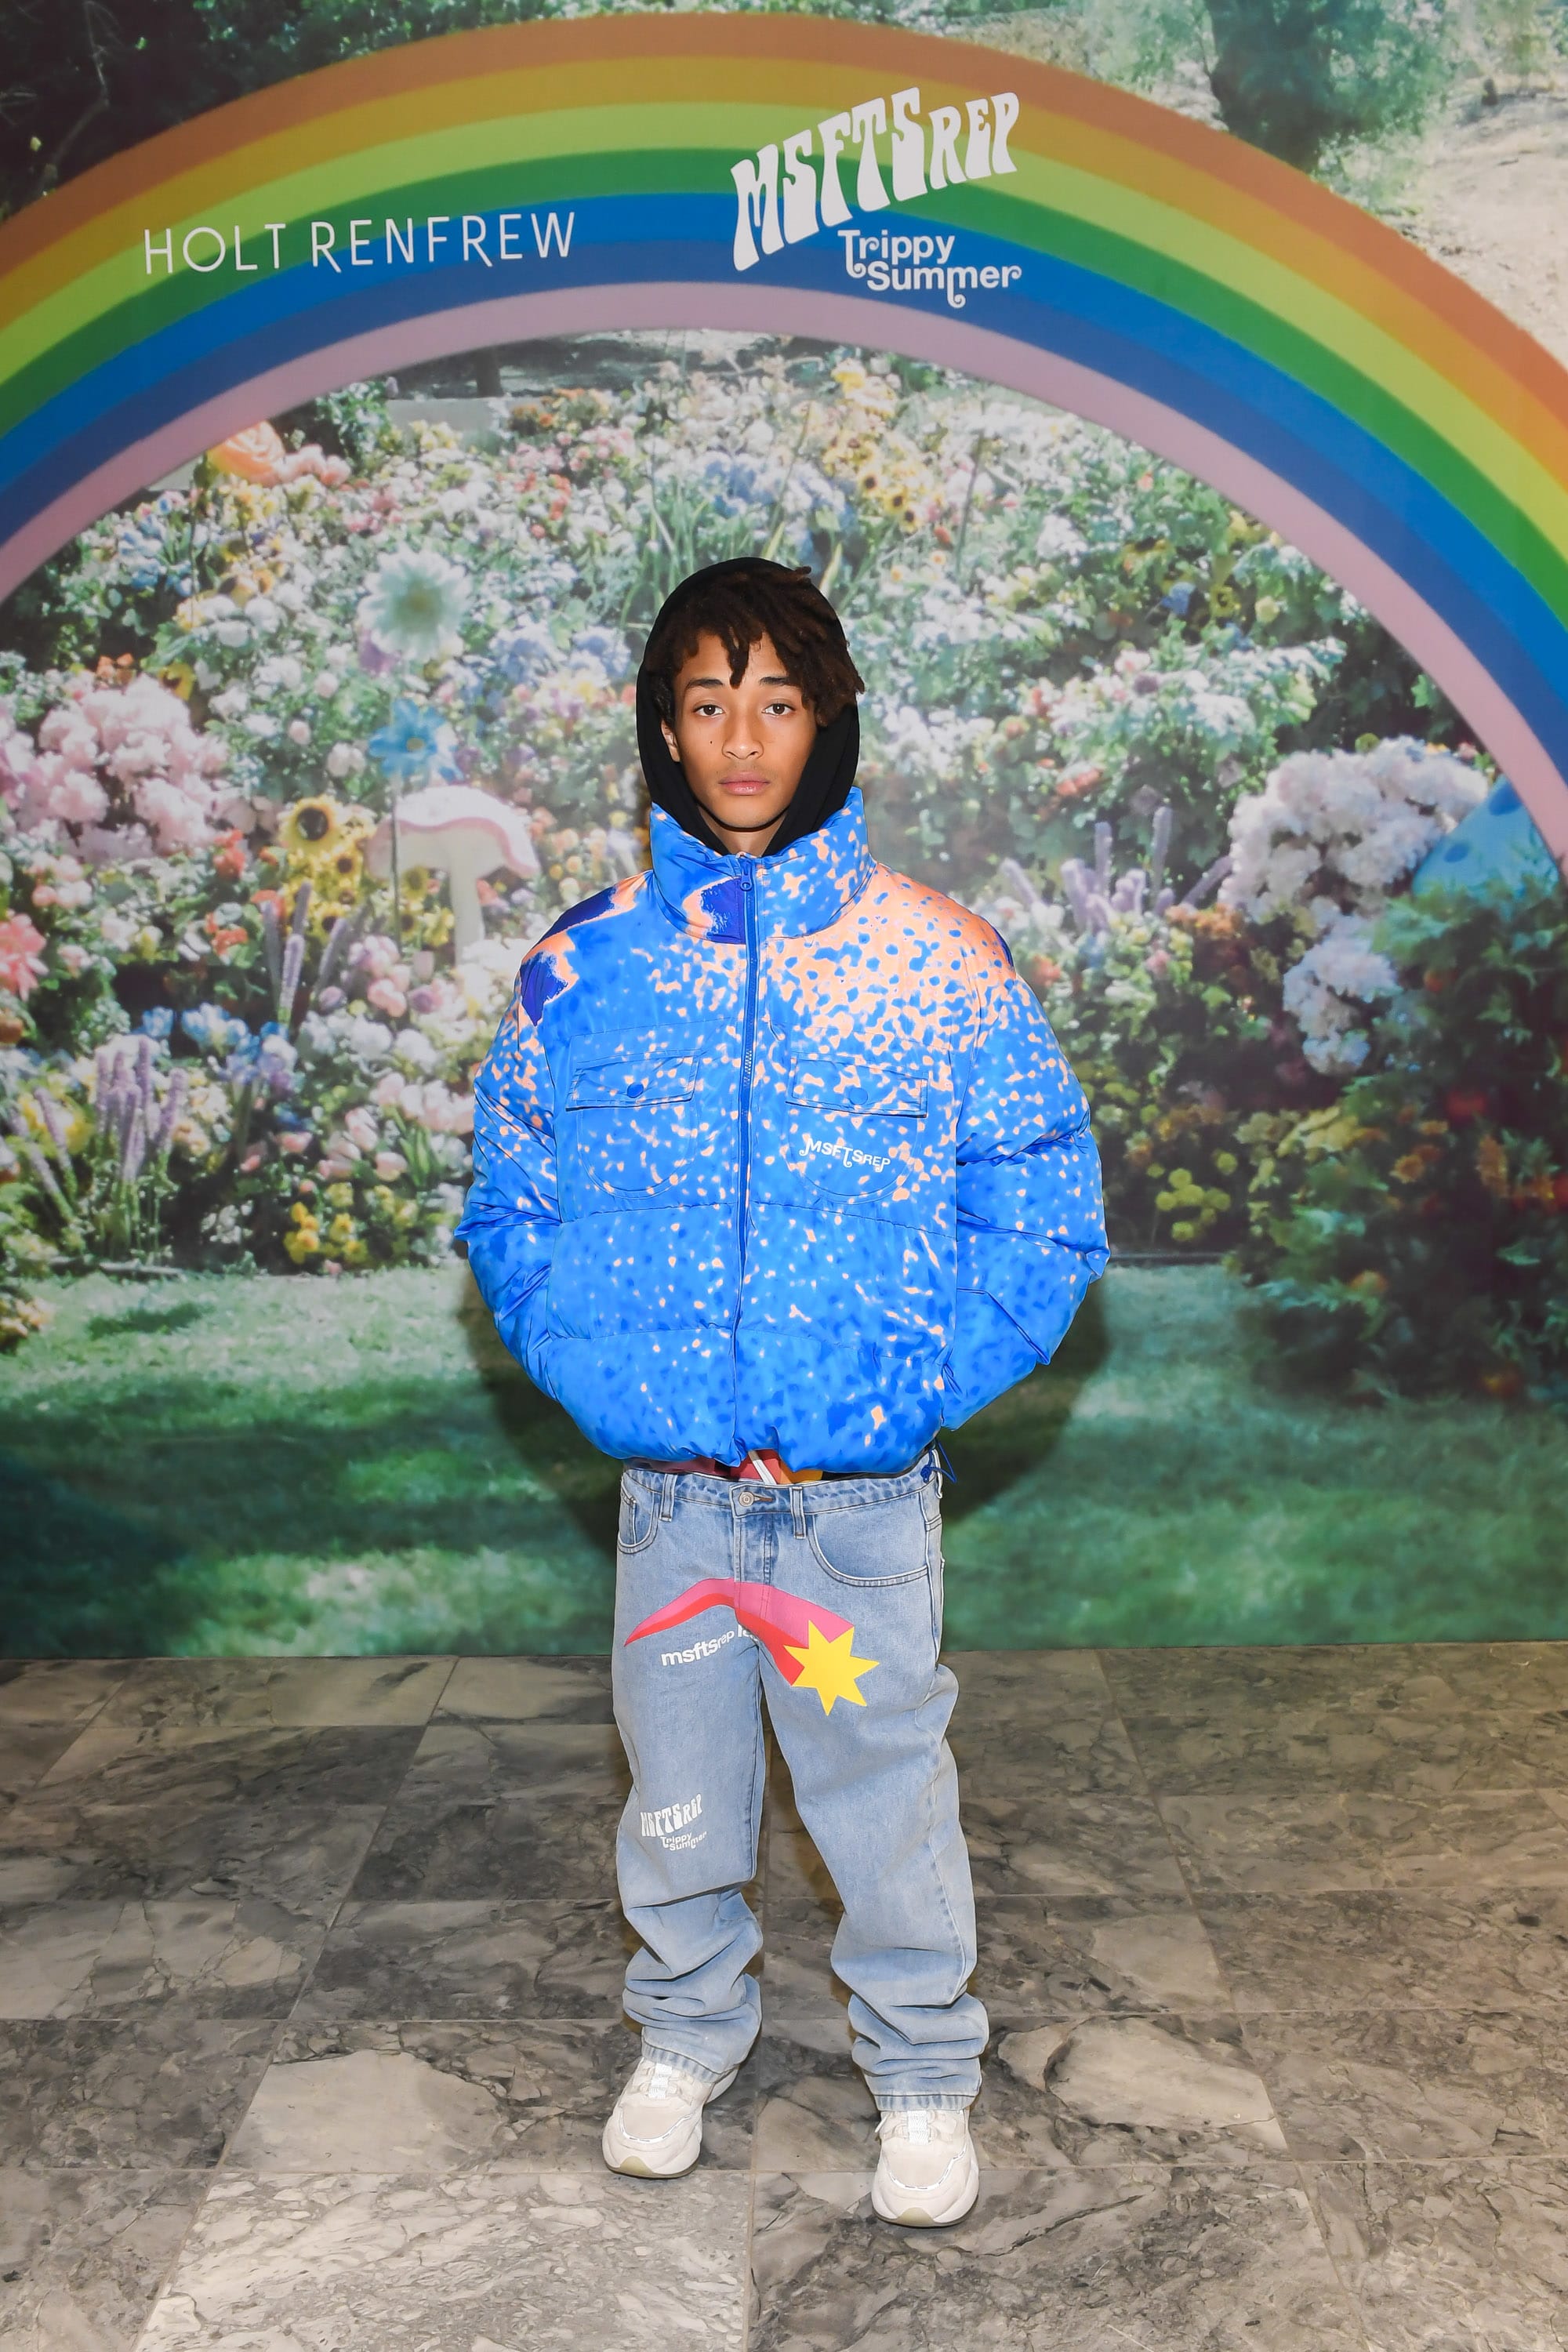 Jaden Smith sells his old clothes to encourage 'recycled fashion